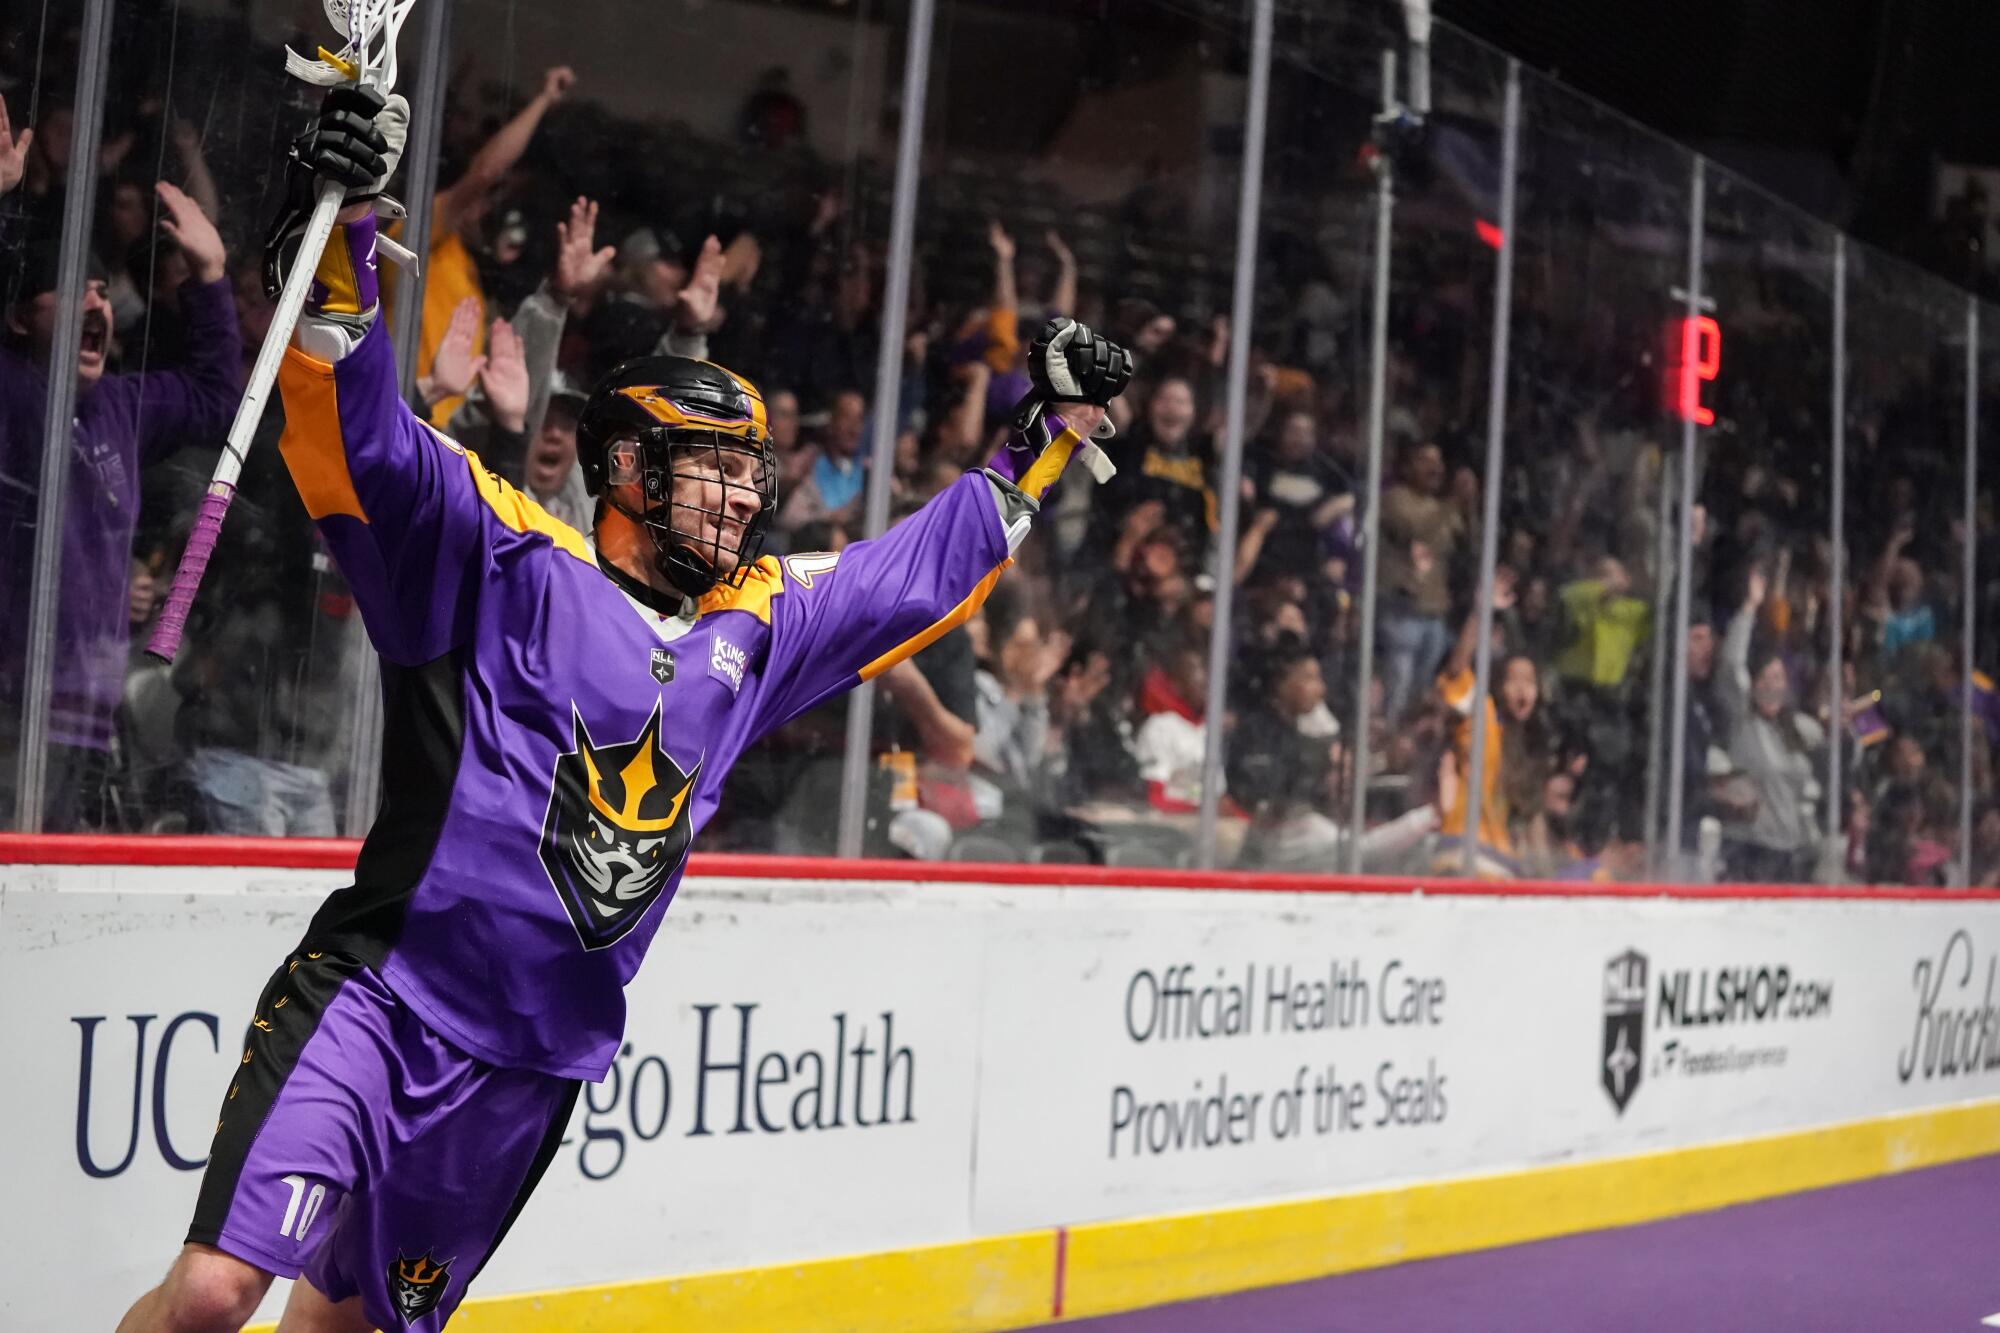 San Diego Seals will take on all comers thanks to lacrosse league's new  approach to schedule - The San Diego Union-Tribune